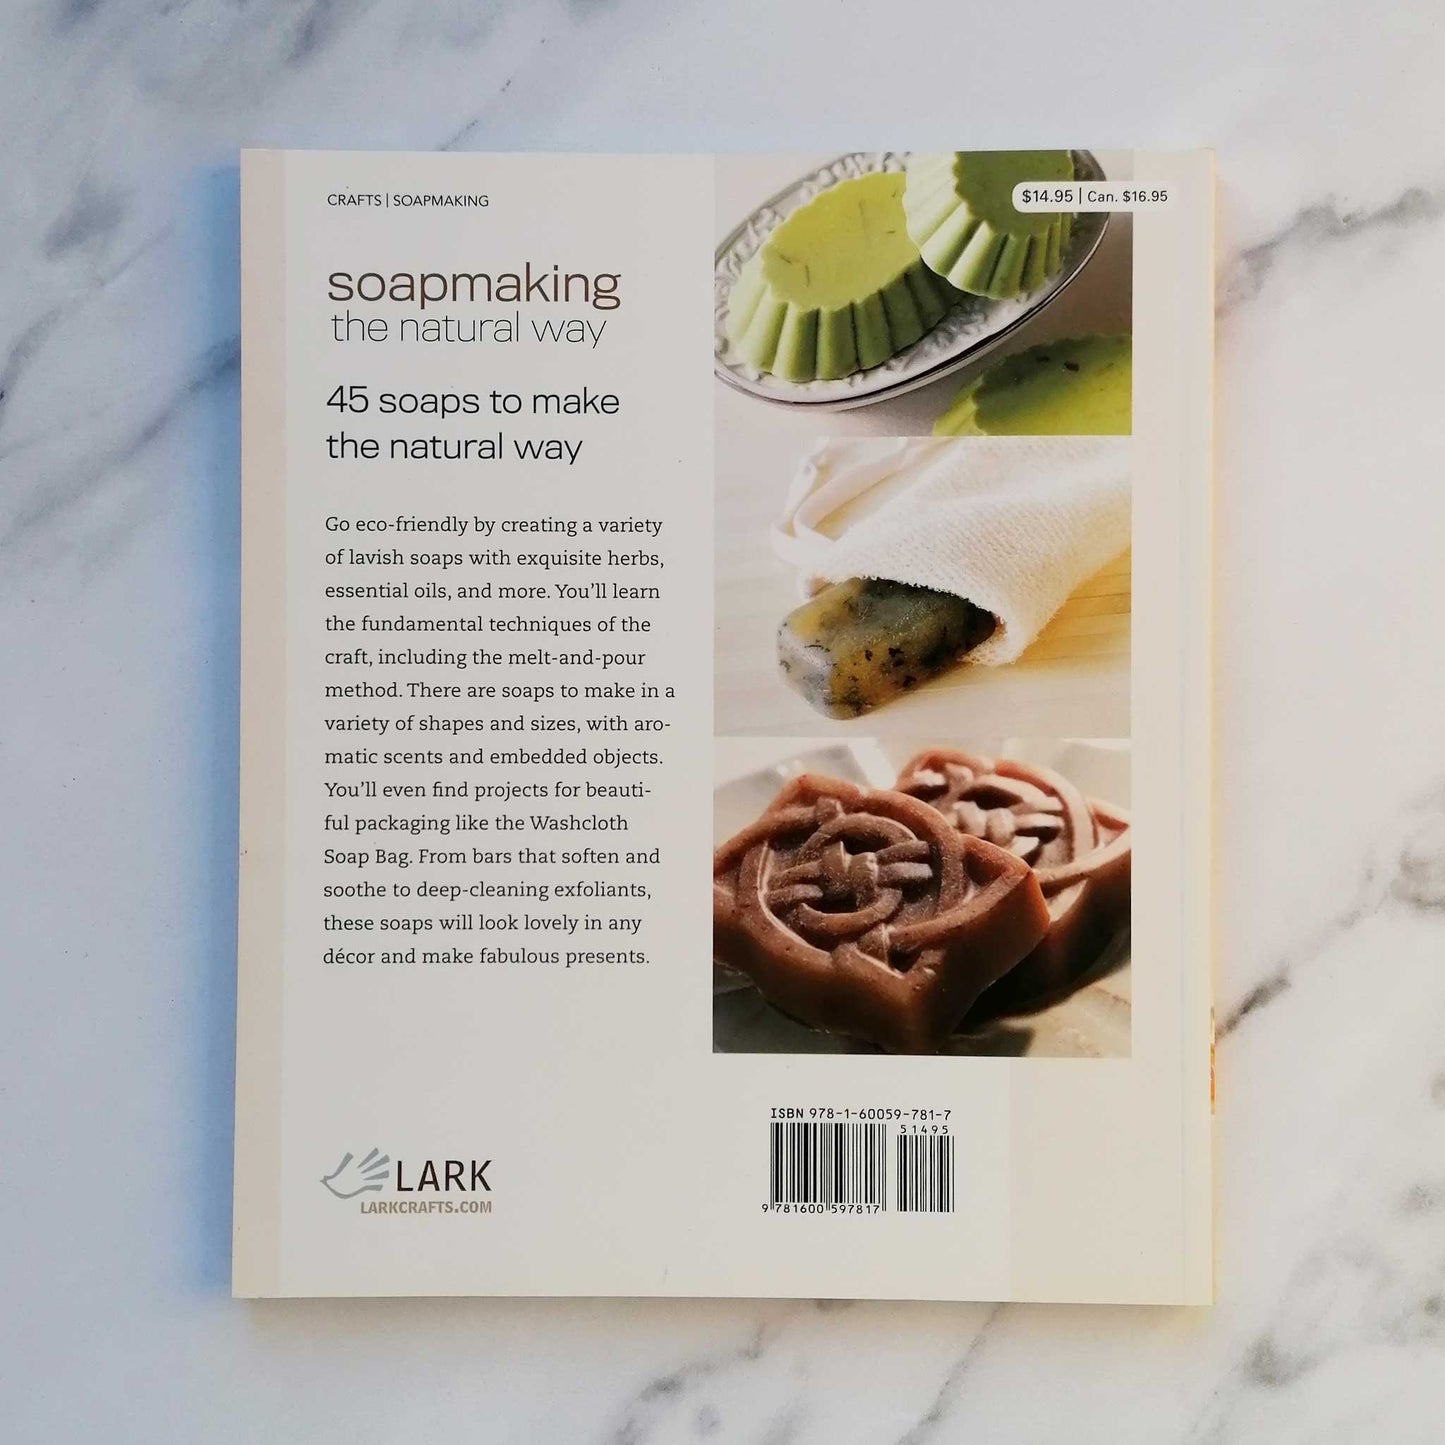 Our Bookshelf Print Books Soapmaking The Natural Way - 45 Melt-and-Pour Recipes Using Herbs, Flowers & Essential Oils